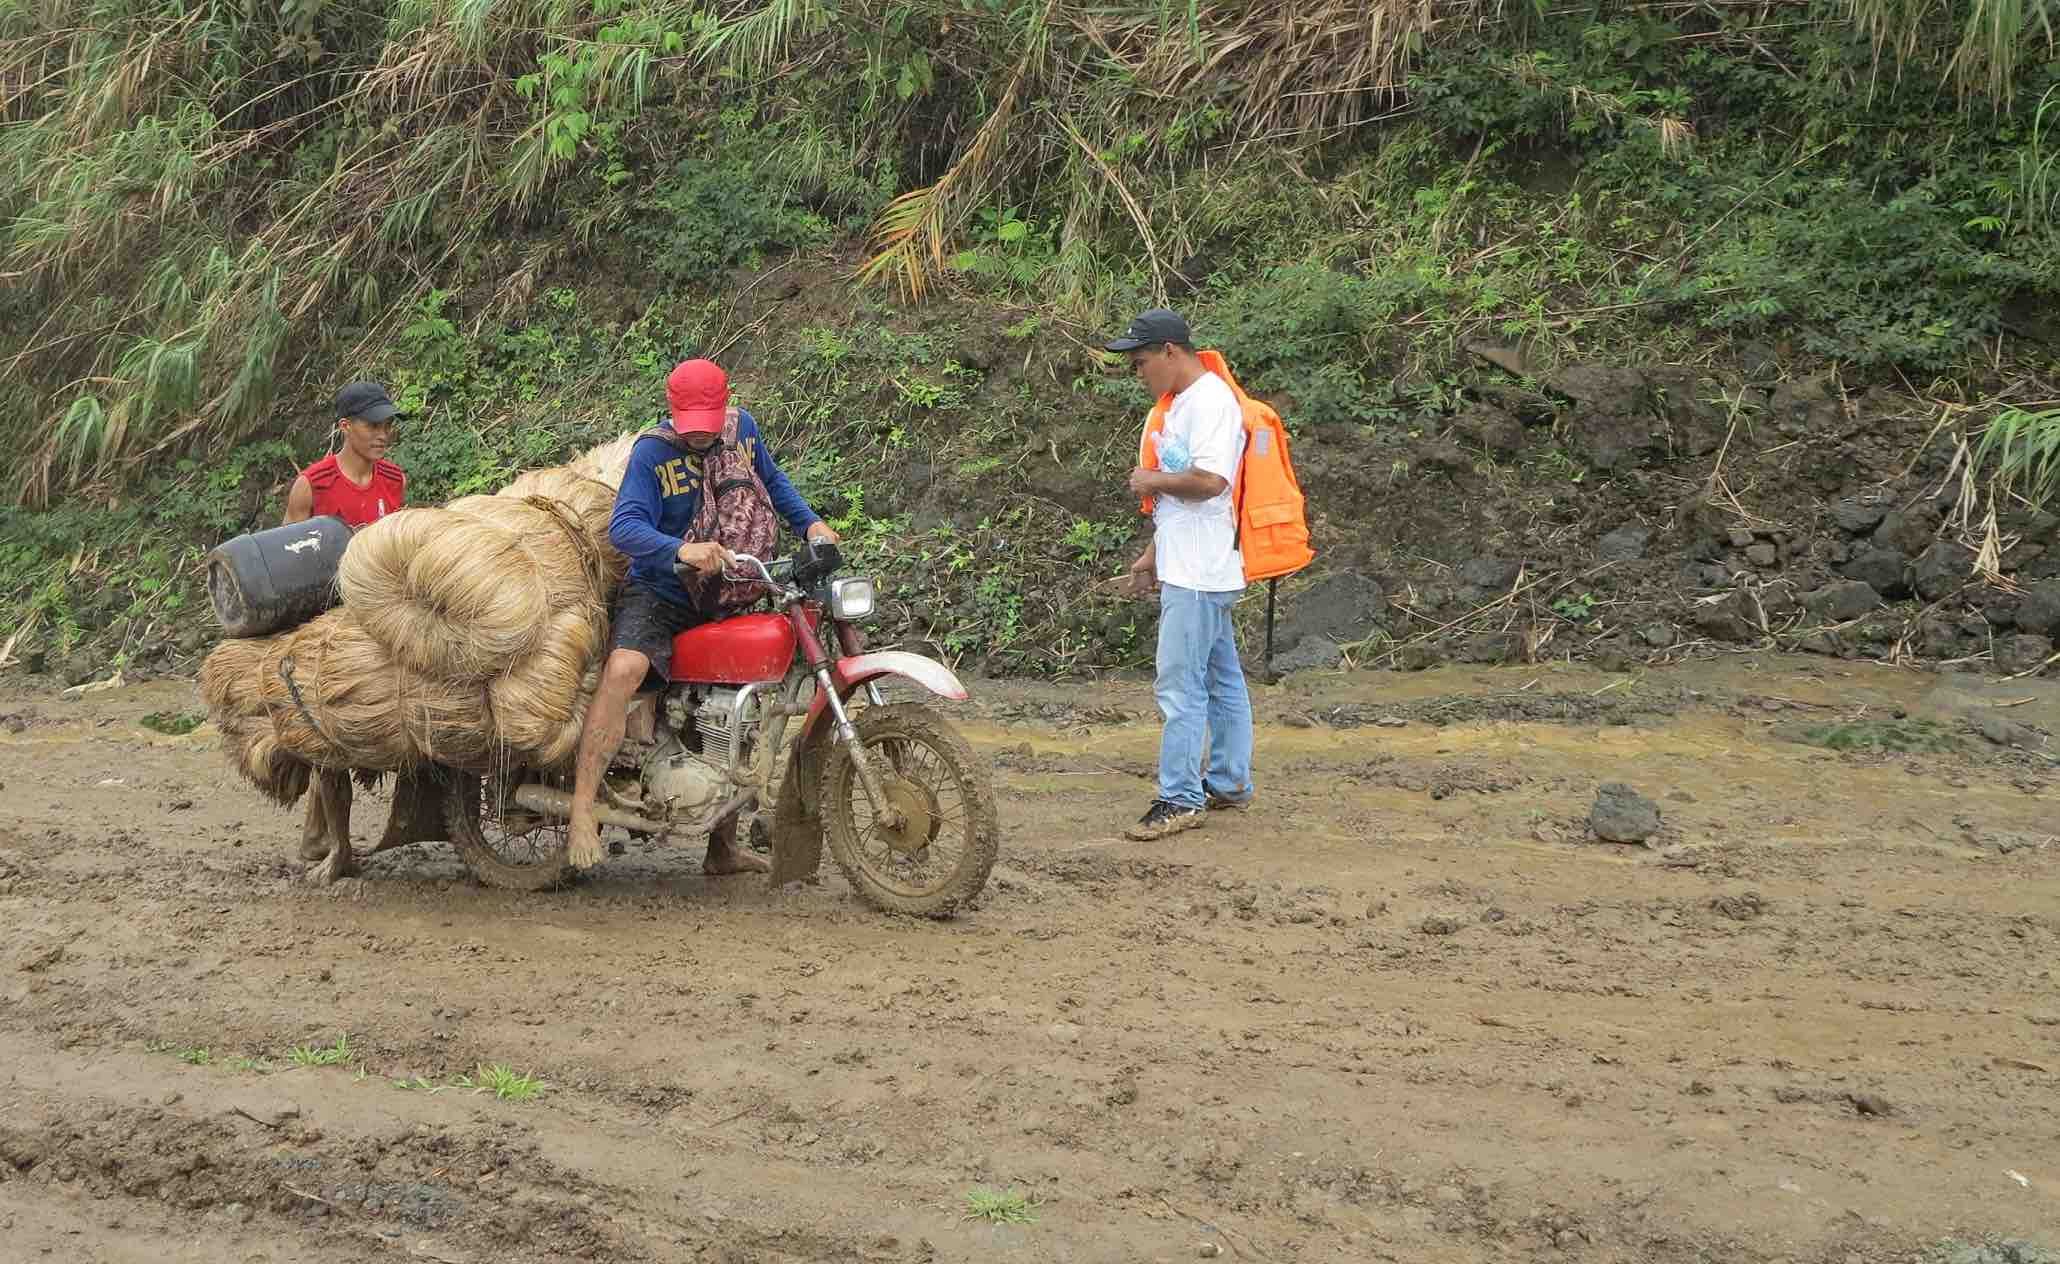 STRUGGLE ON THE ROAD. These two men struggle to bring their abaca to the town market. It has been raining for days and they need the income, so they risked the trip. 